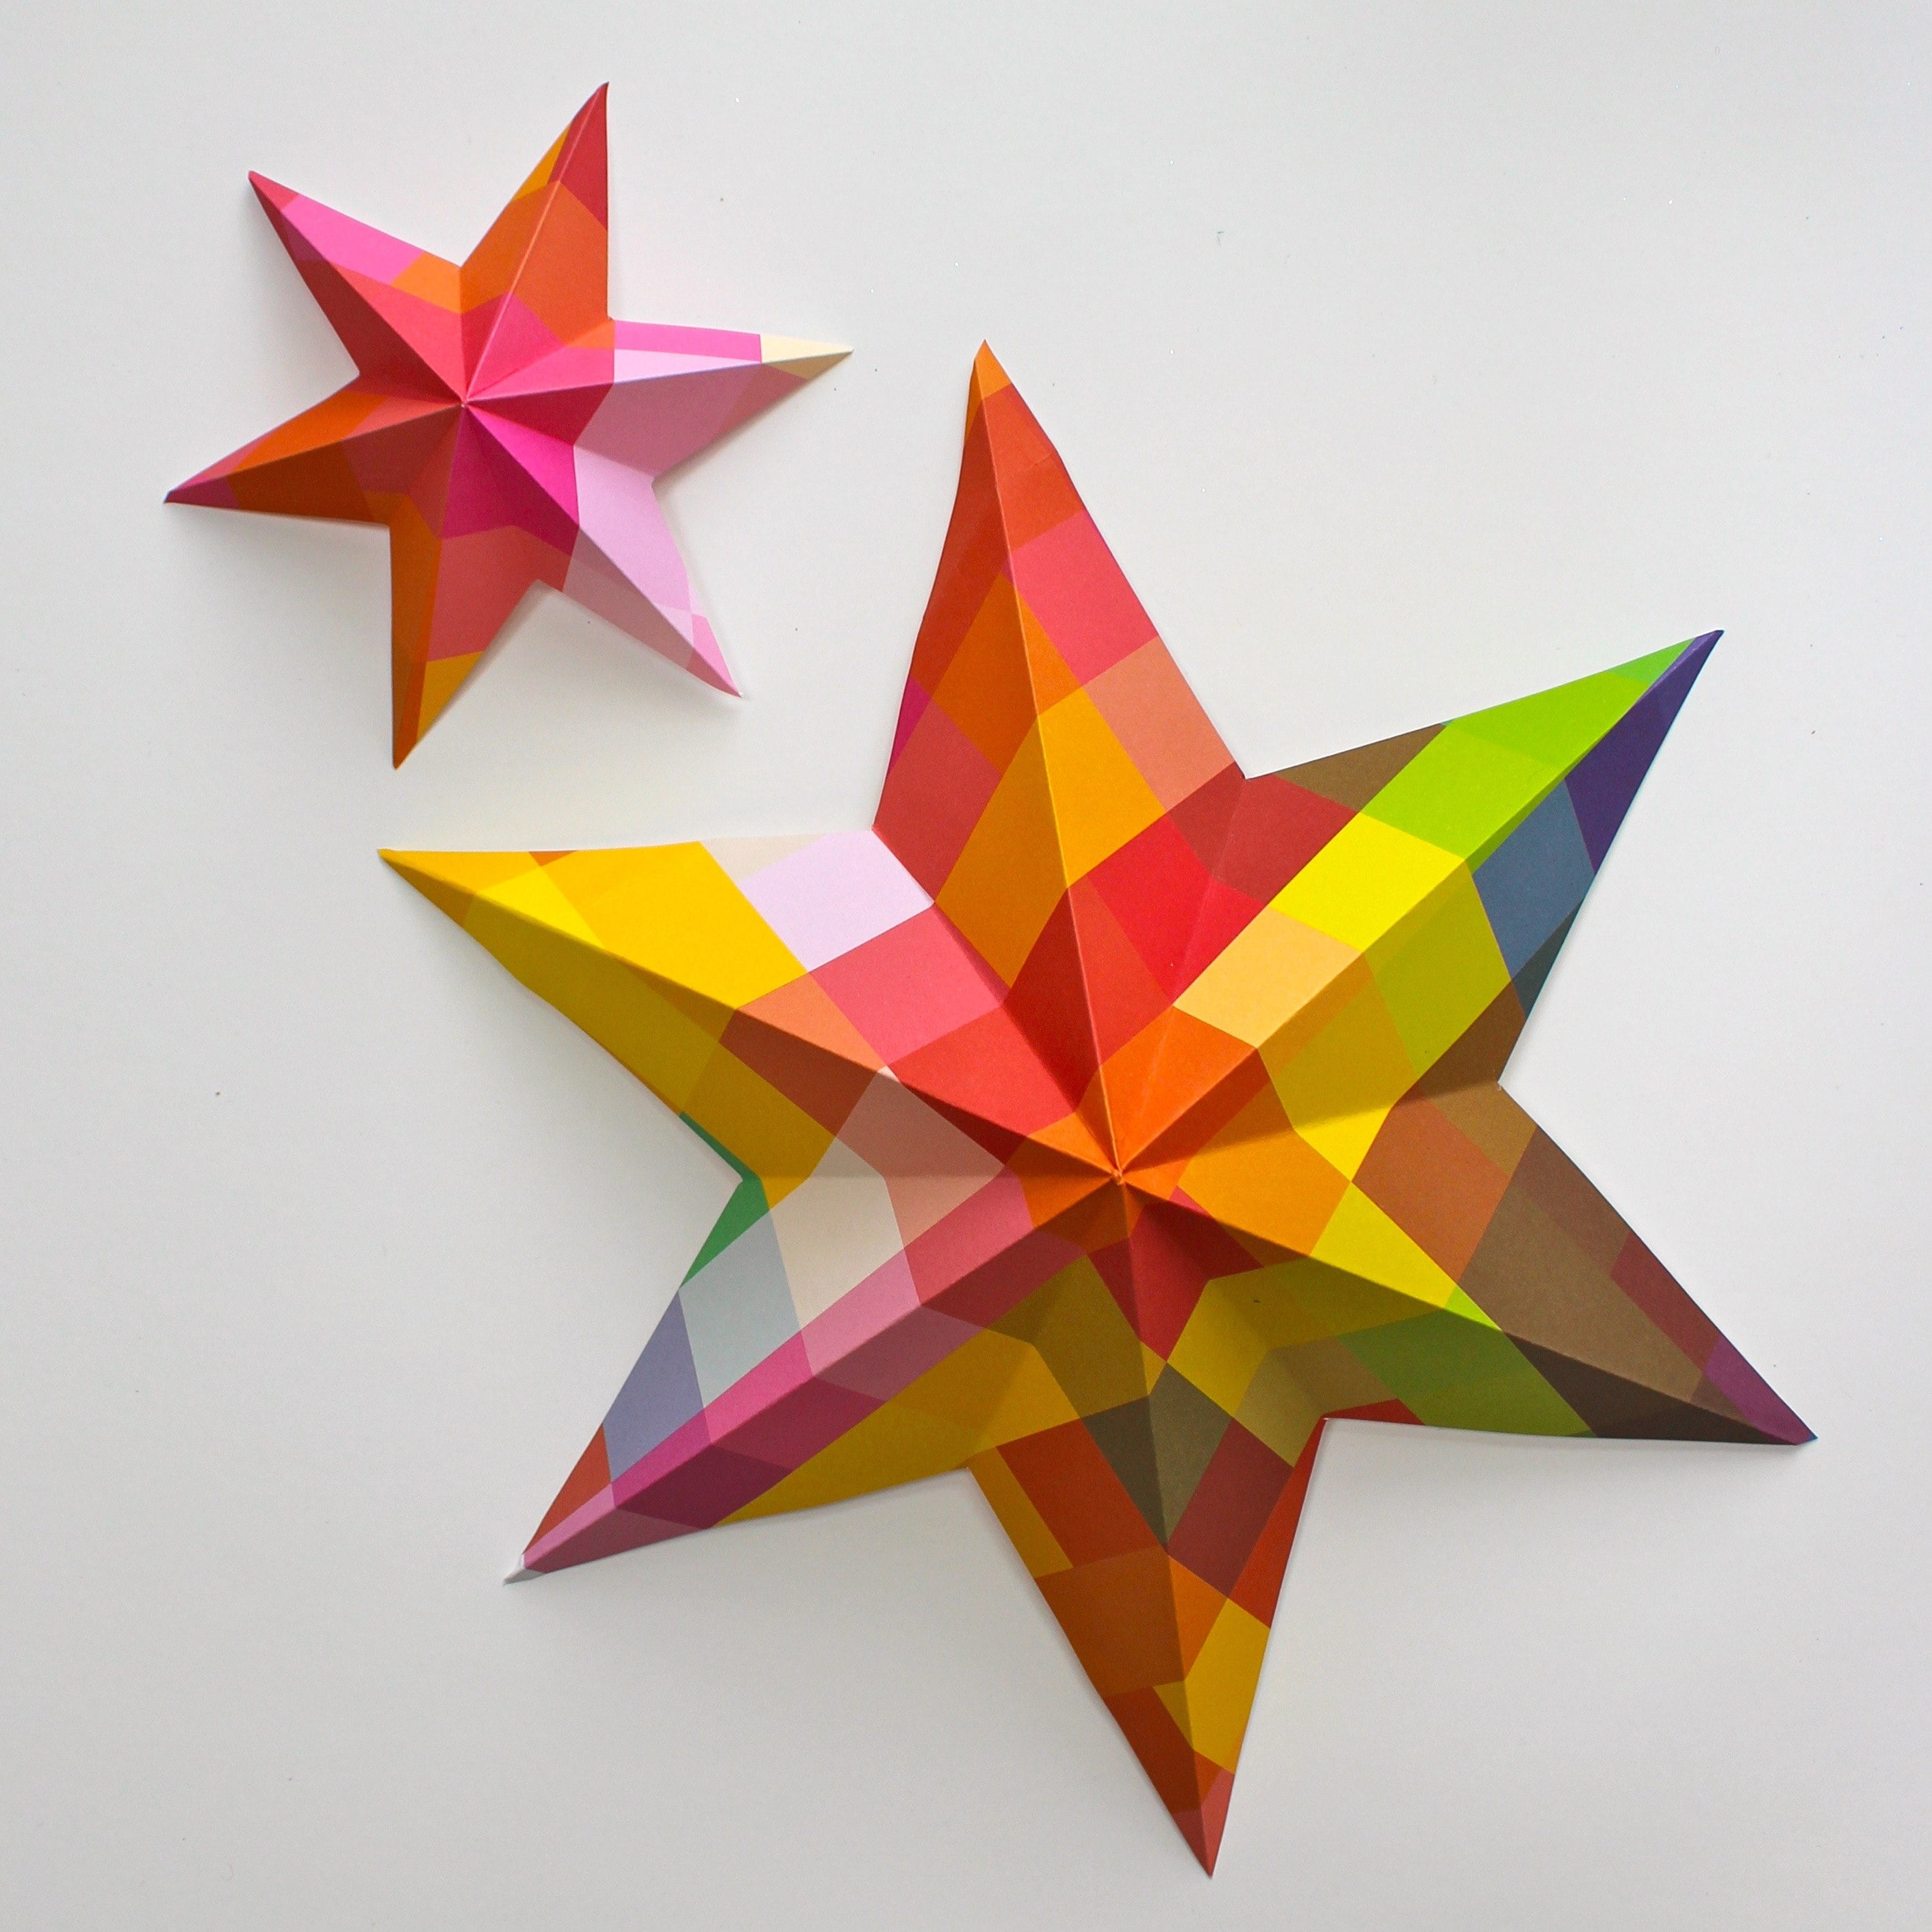 DIY Paper Art Projects - Learn How to Make 3D Paper Stars [Video Tutorial Included] homesthetics (17)